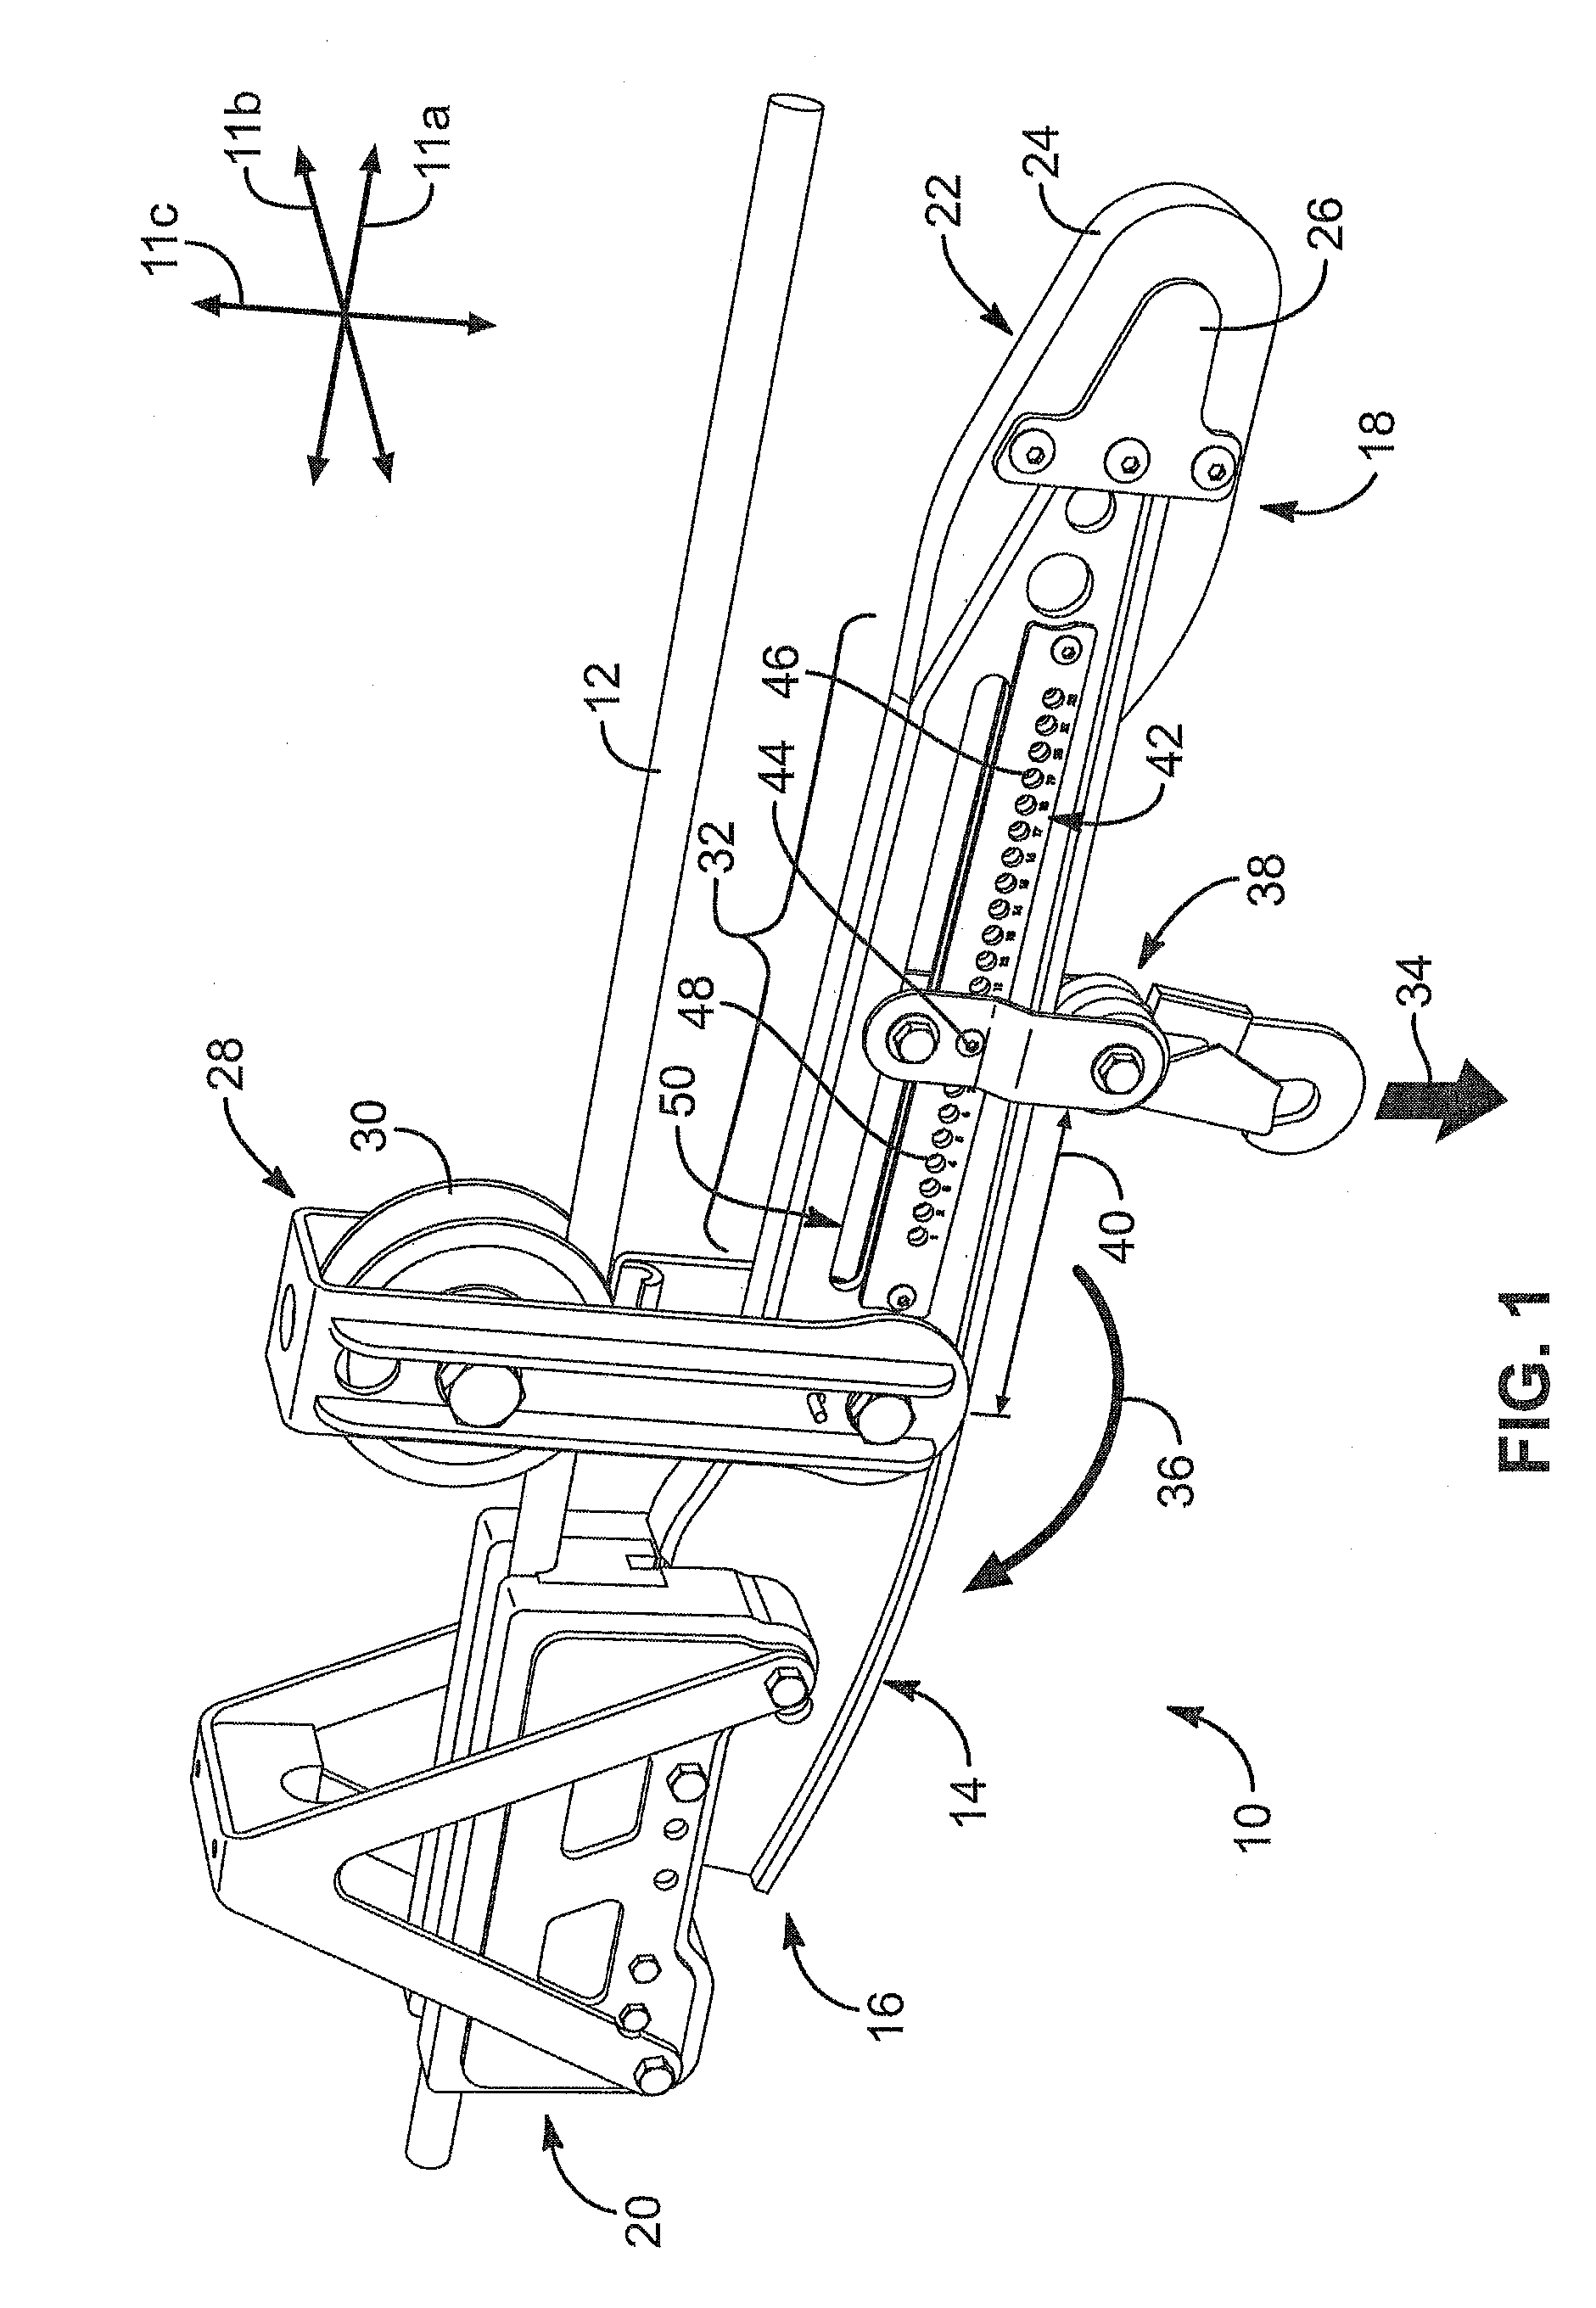 Load-minimizing, trolley arrester apparatus and method